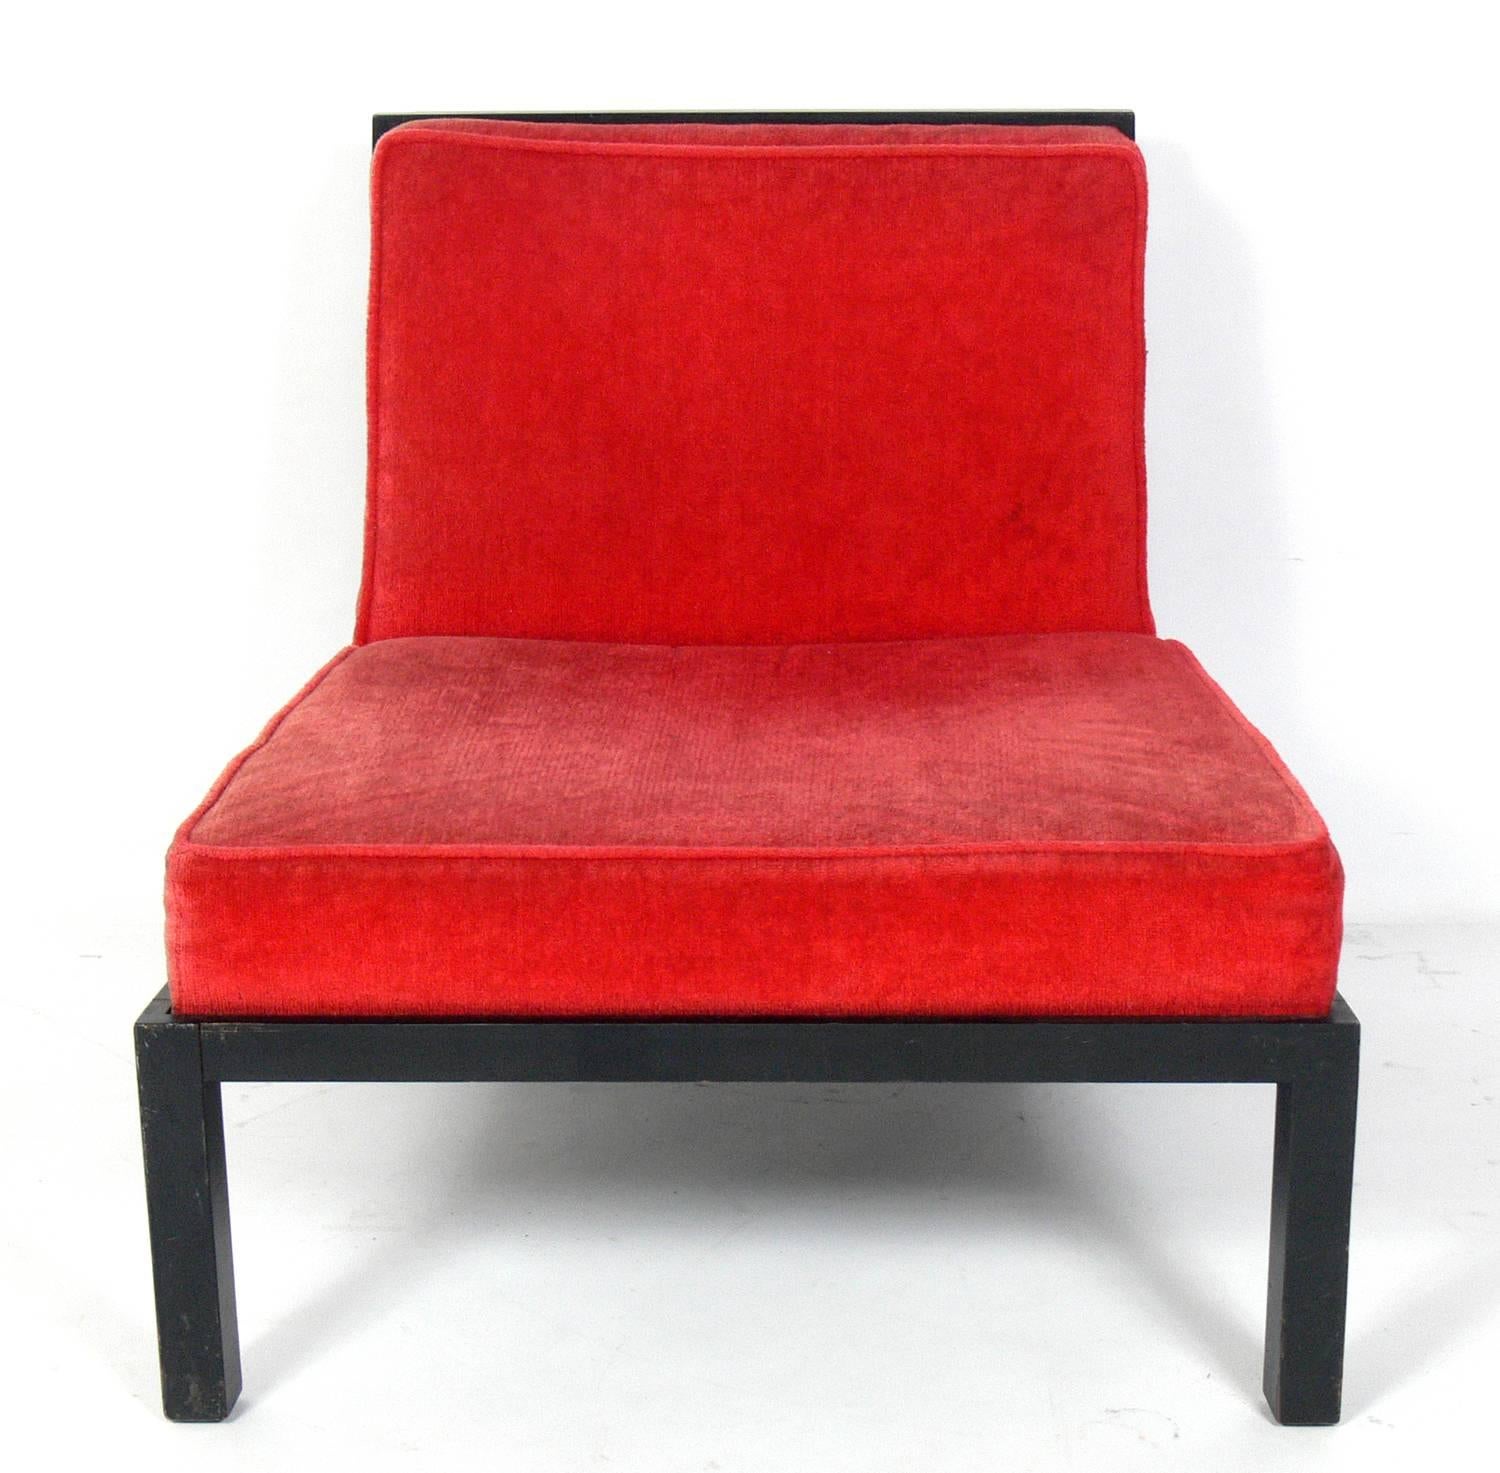 American Asian Inspired Slipper Chair Designed by Michael Taylor for Baker